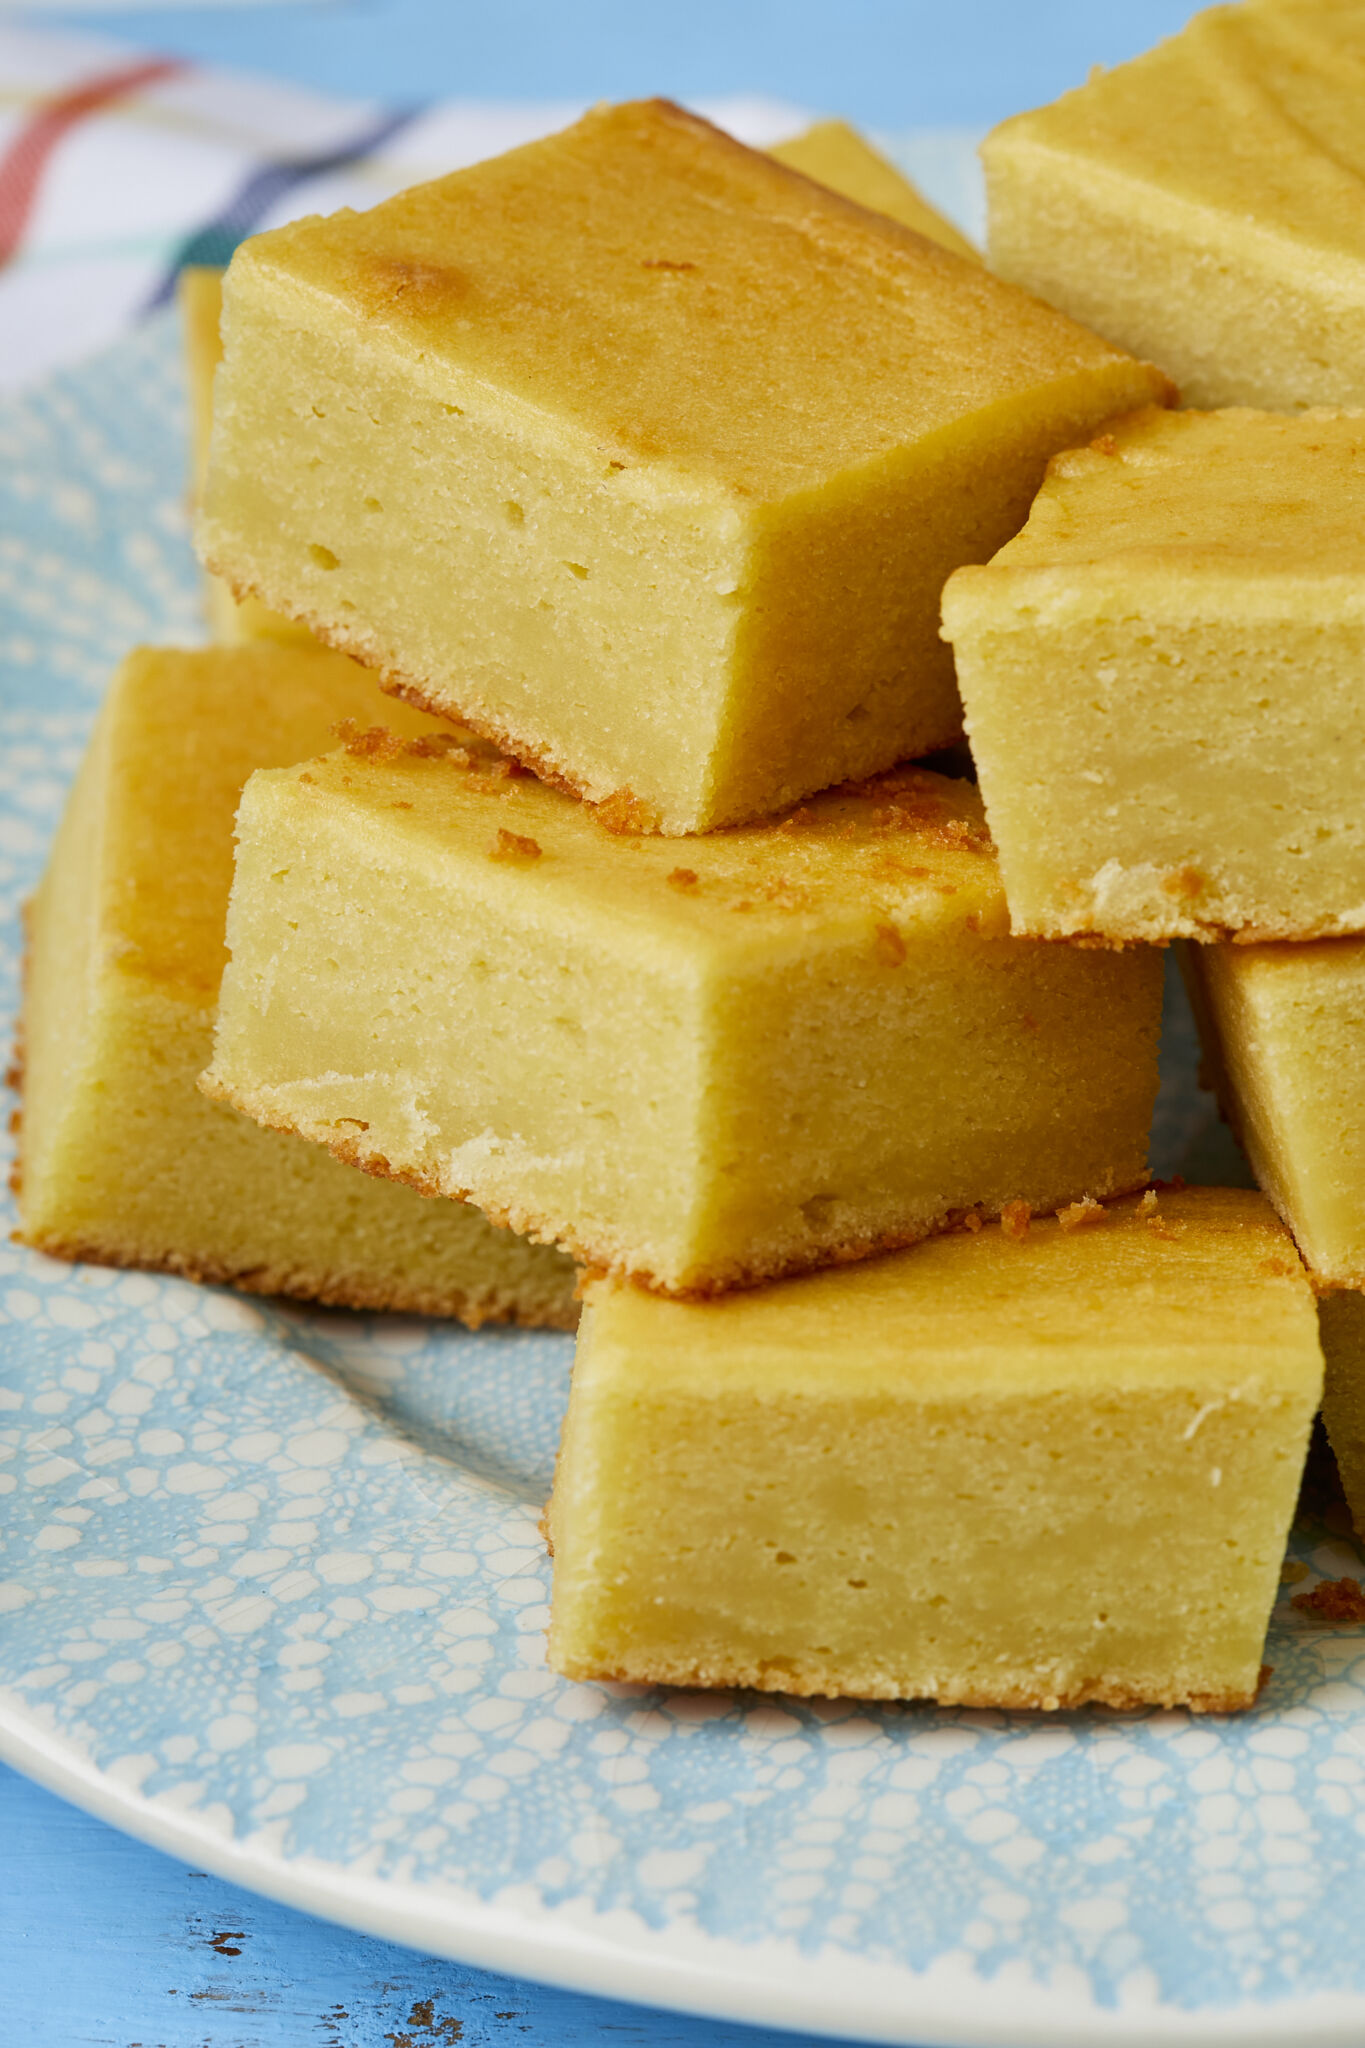 Golden luscious Mango Butter Mochi is piled on a light teal-blue plate, with silky soft texture on top and crispy crust at the bottom.